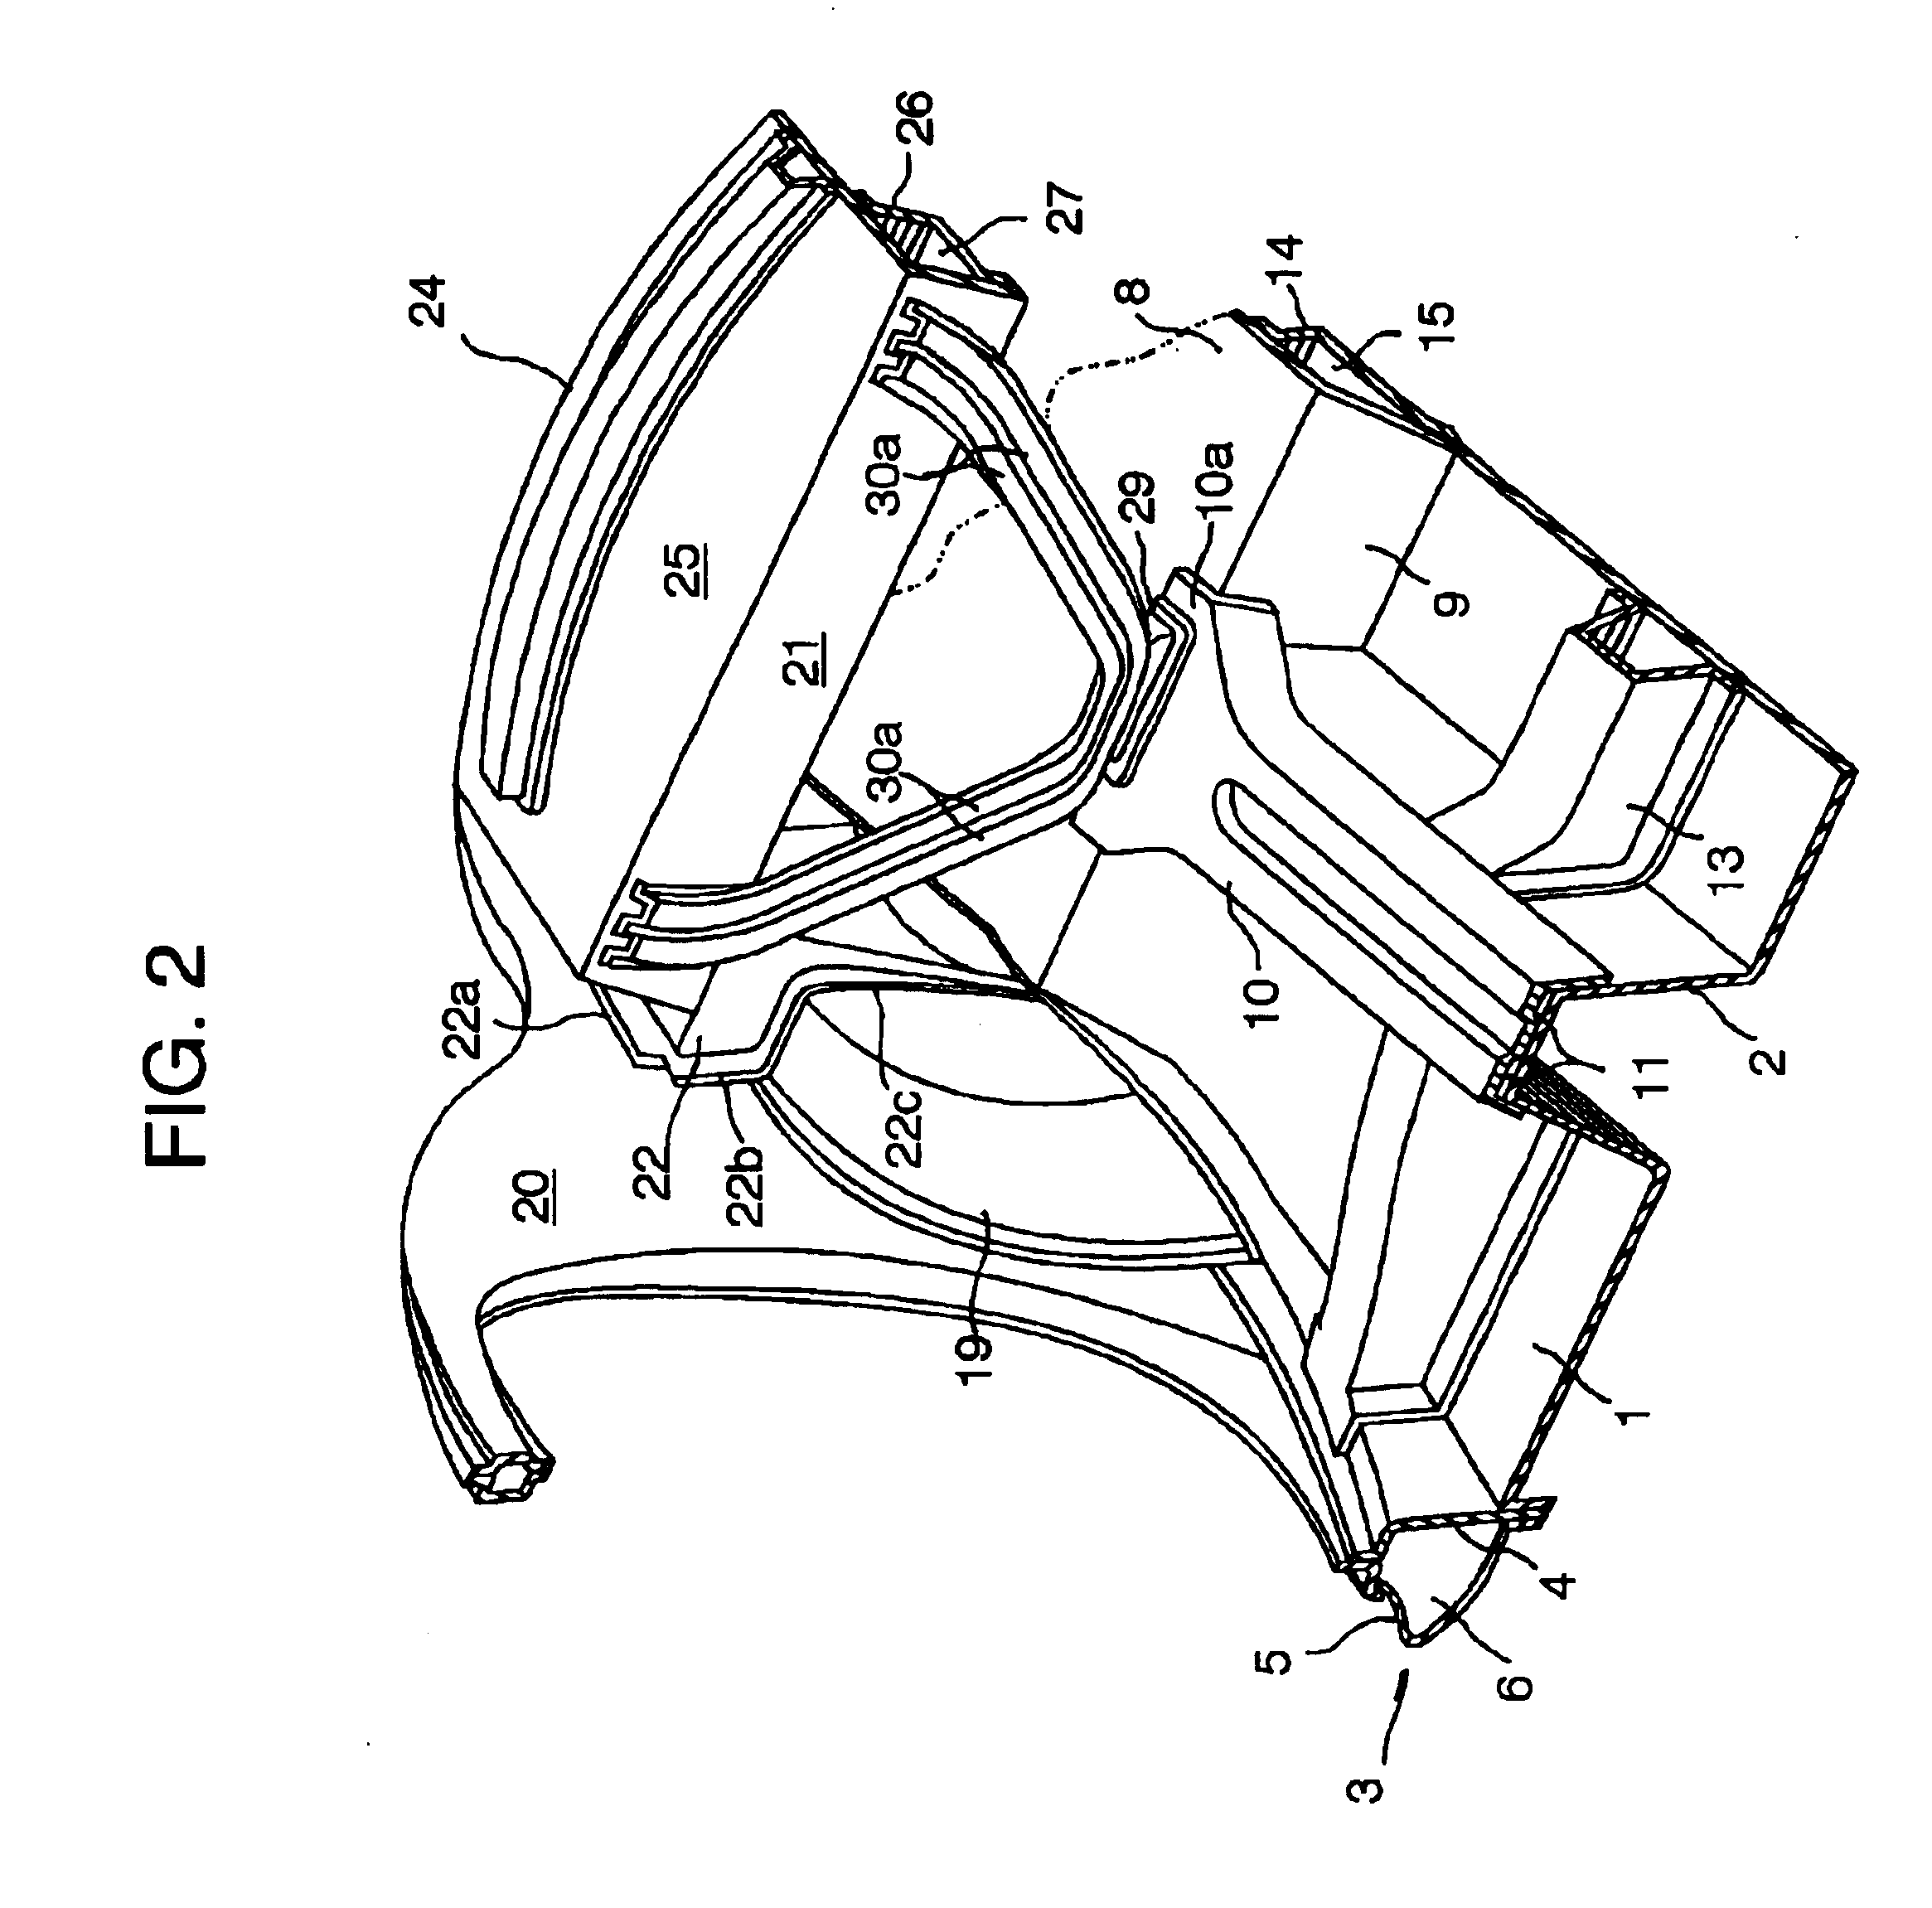 Rear body structure for vehicle body